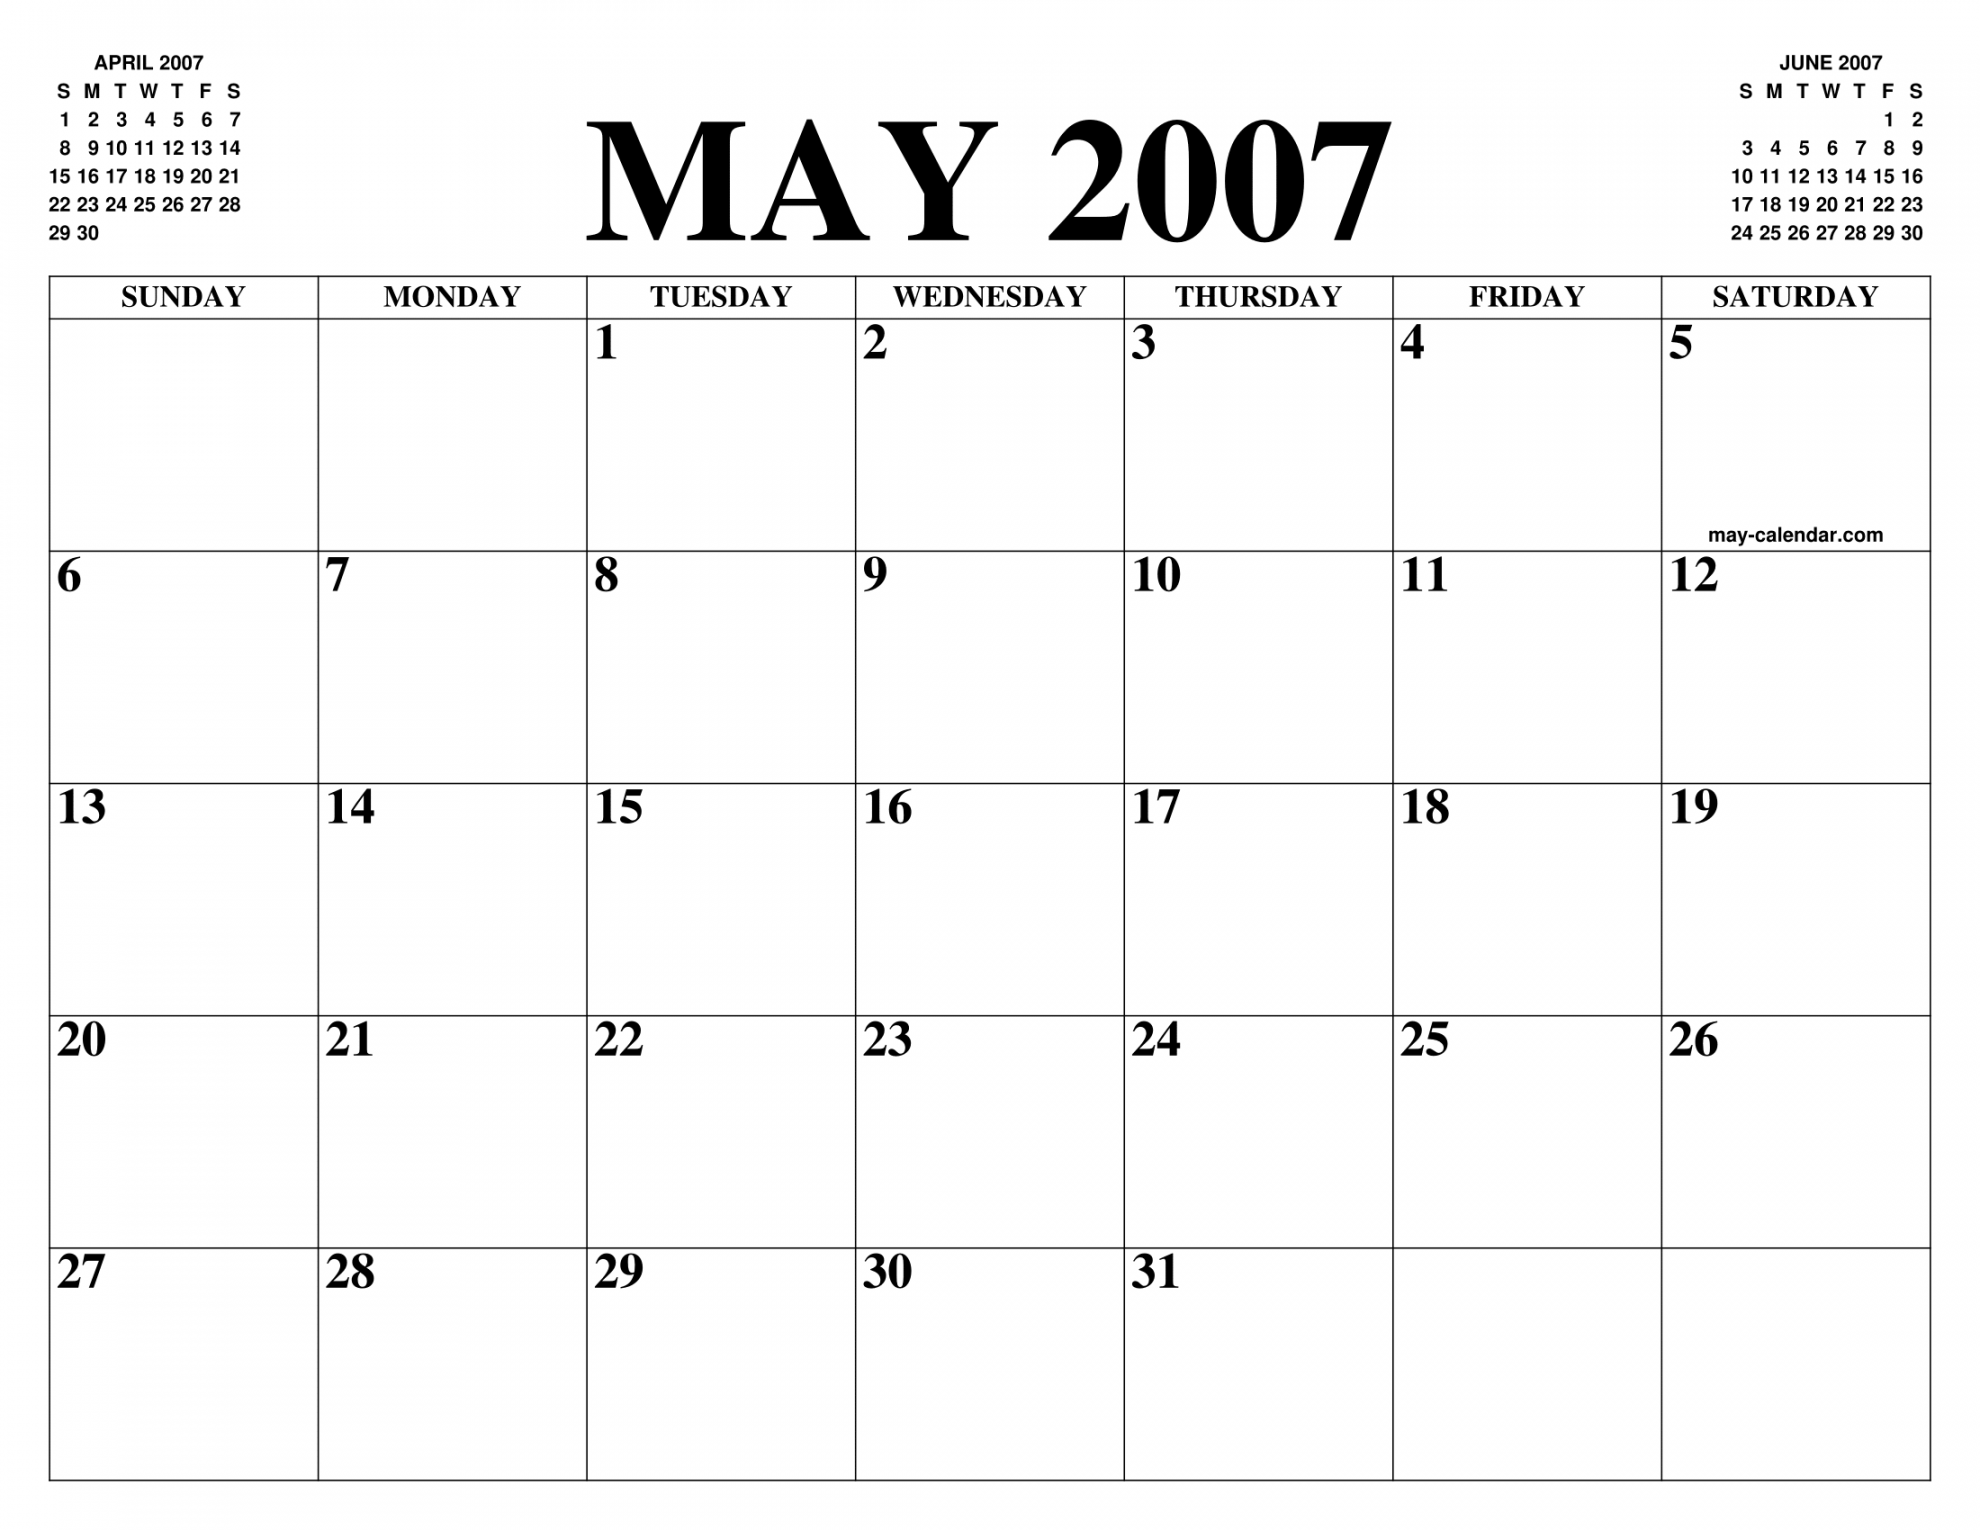 MAY CALENDAR OF THE MONTH: FREE PRINTABLE MAY CALENDAR OF THE